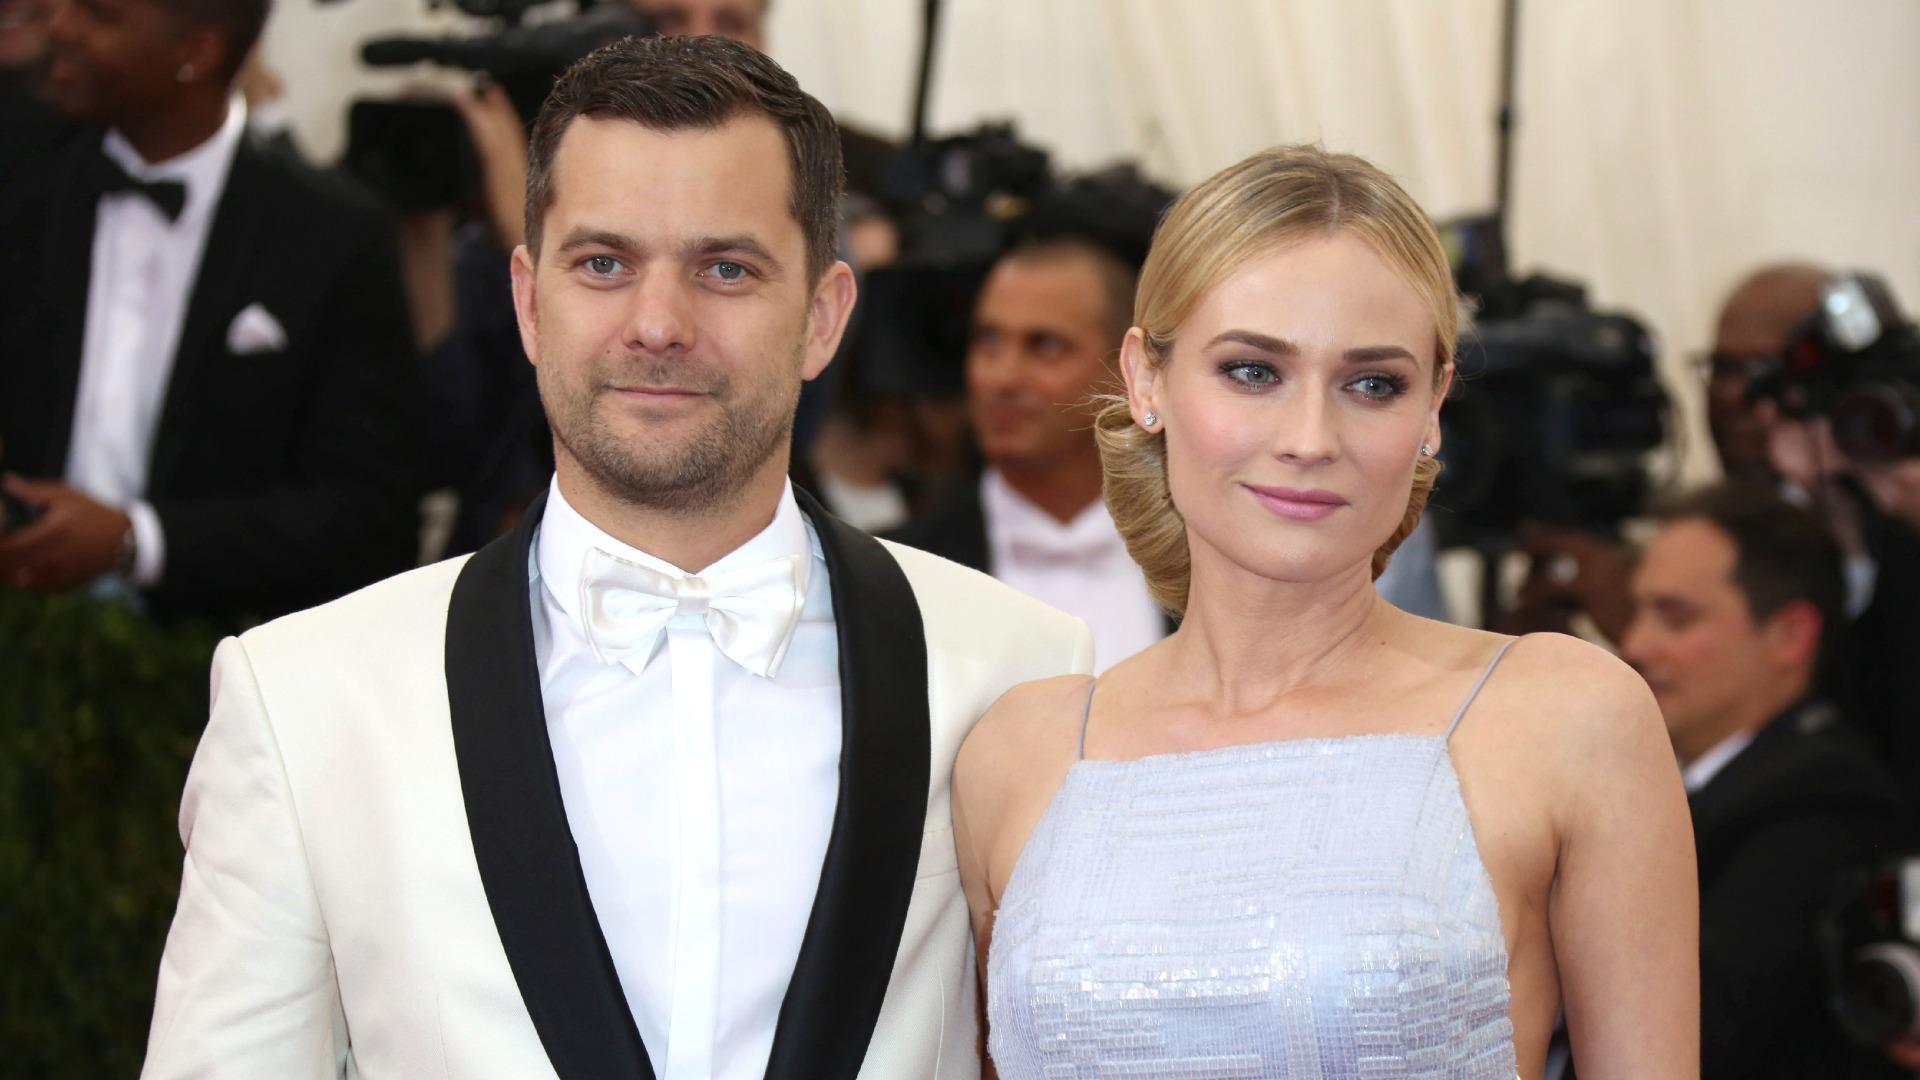 'Charles James: Beyond Fashion' Costume Institute Gala at the Metropolitan Museum of Art - Outside Arrivals Featuring: Diane Kruger,Joshua Jackson Where: New York City, New York, United States When: 05 May 2014 Credit: WENN.com **Not available for publication in Germany**